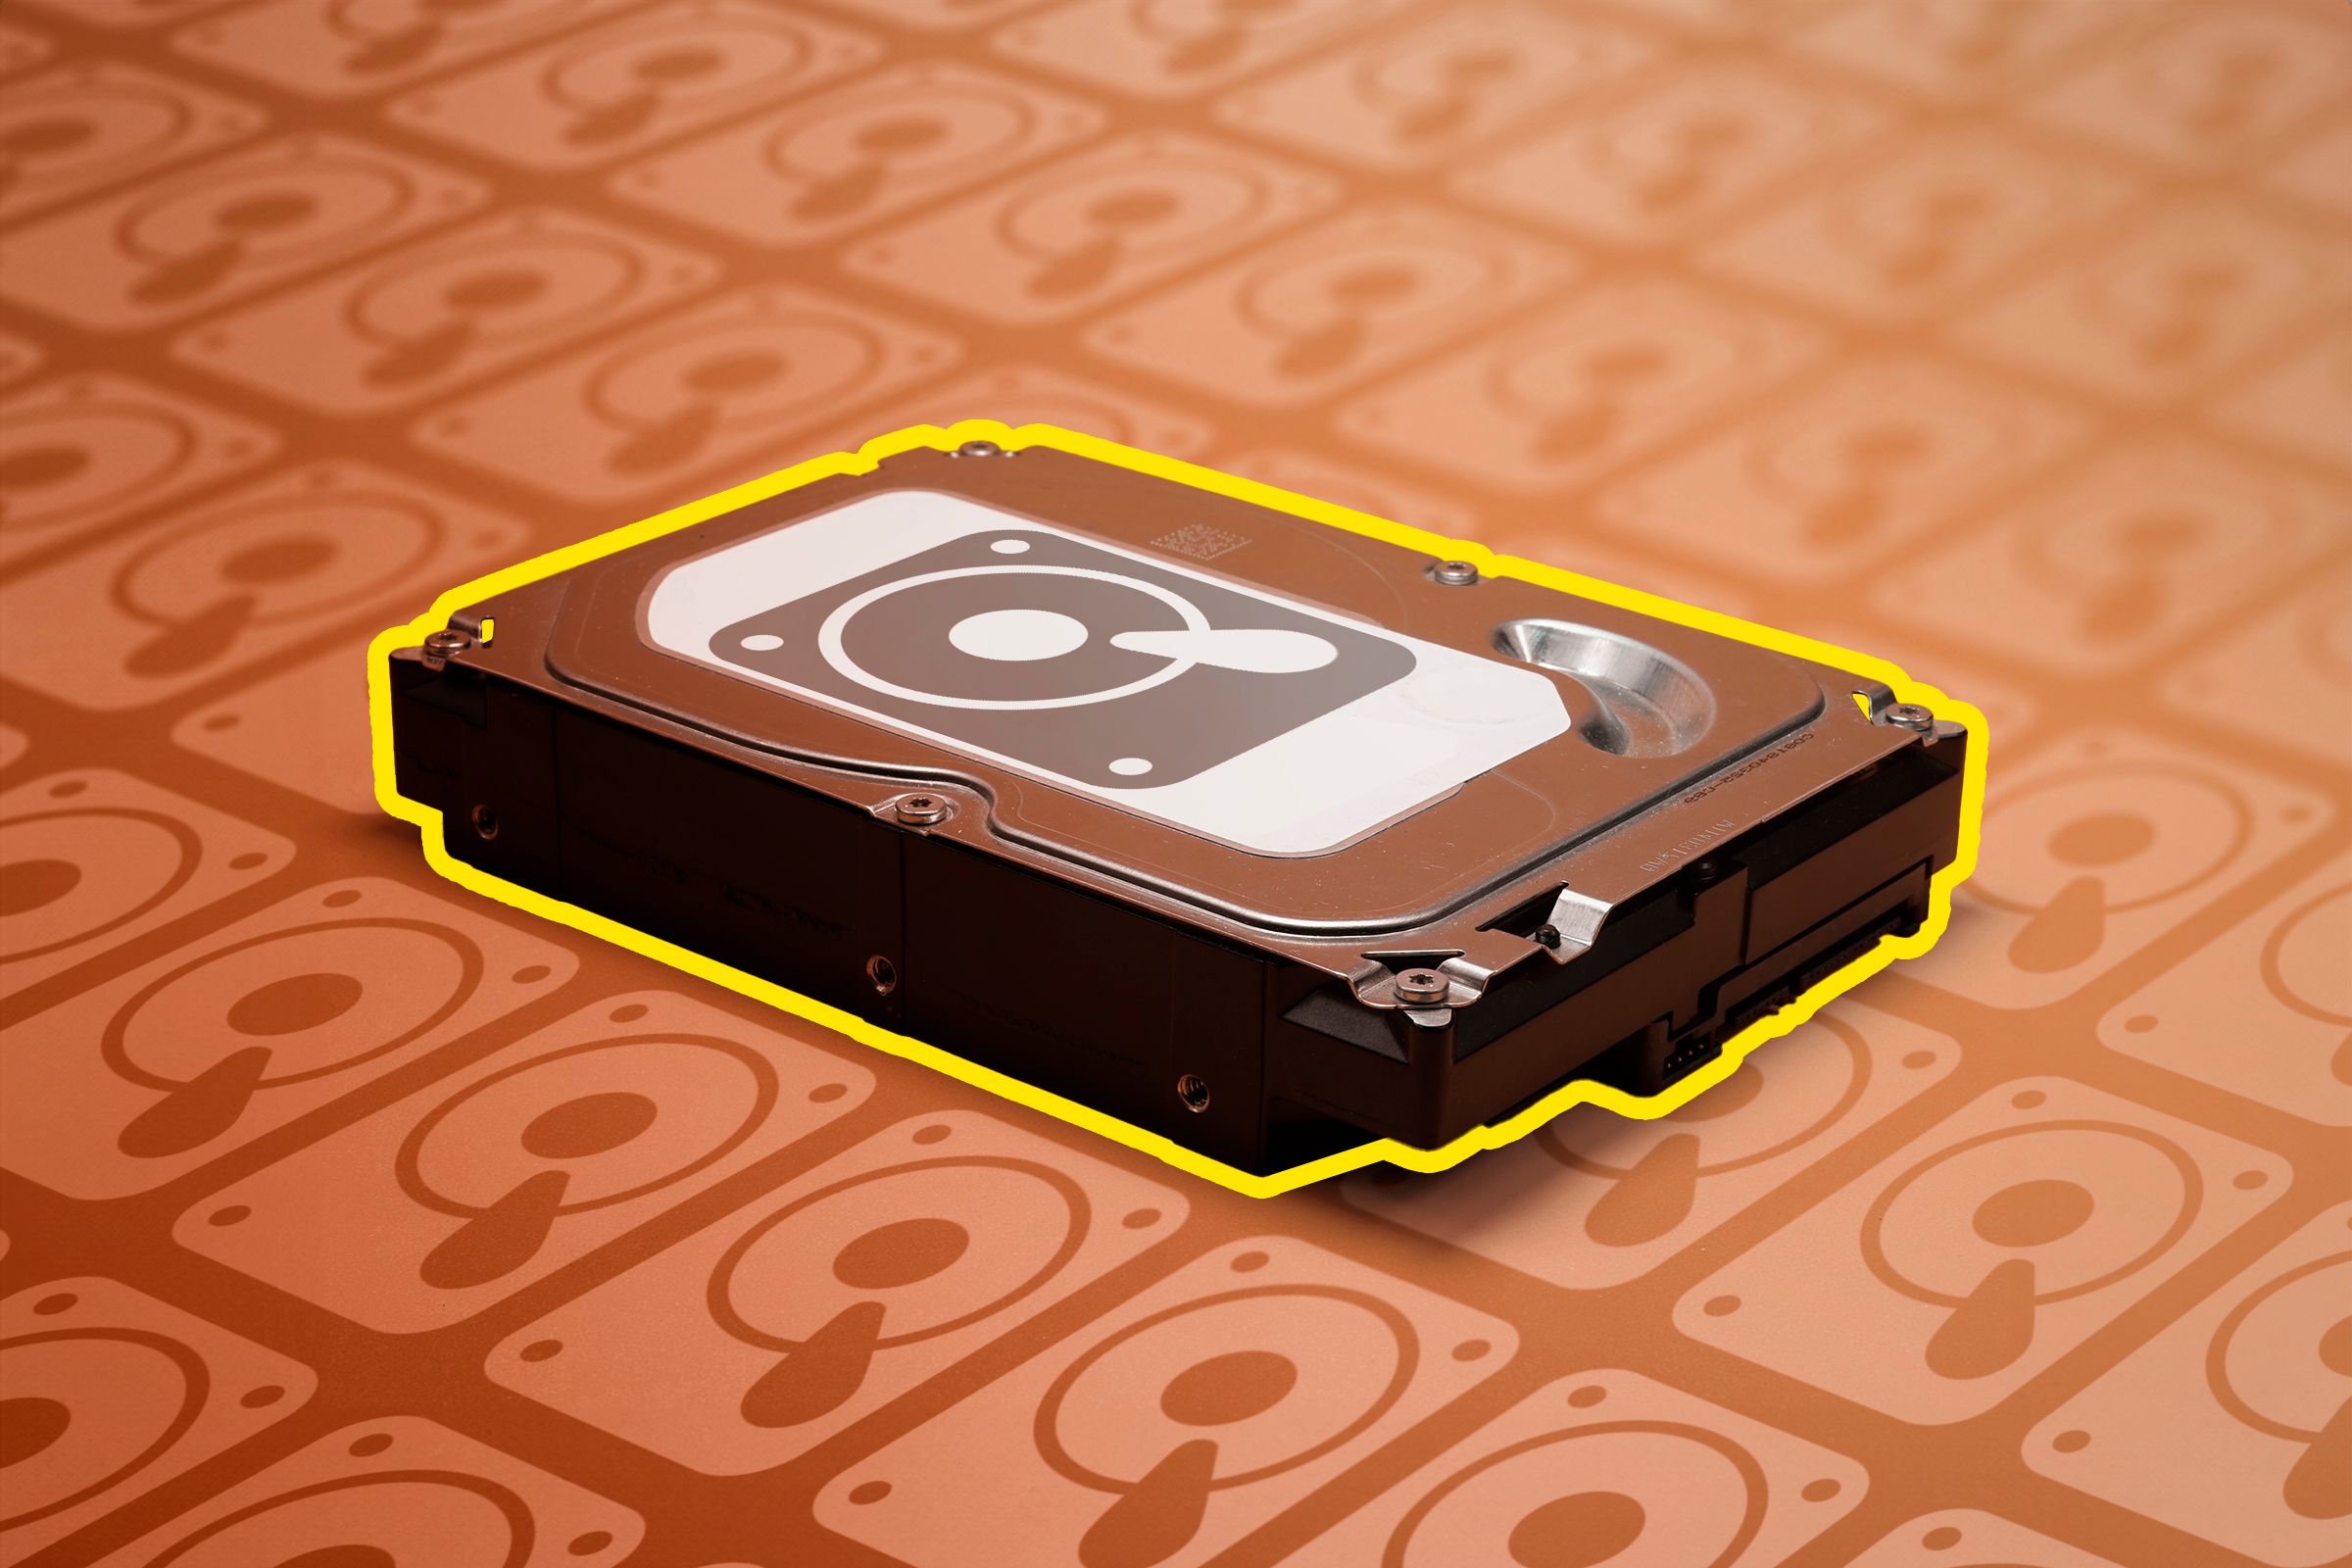 HDD on an orange background with multiple HDD icons.